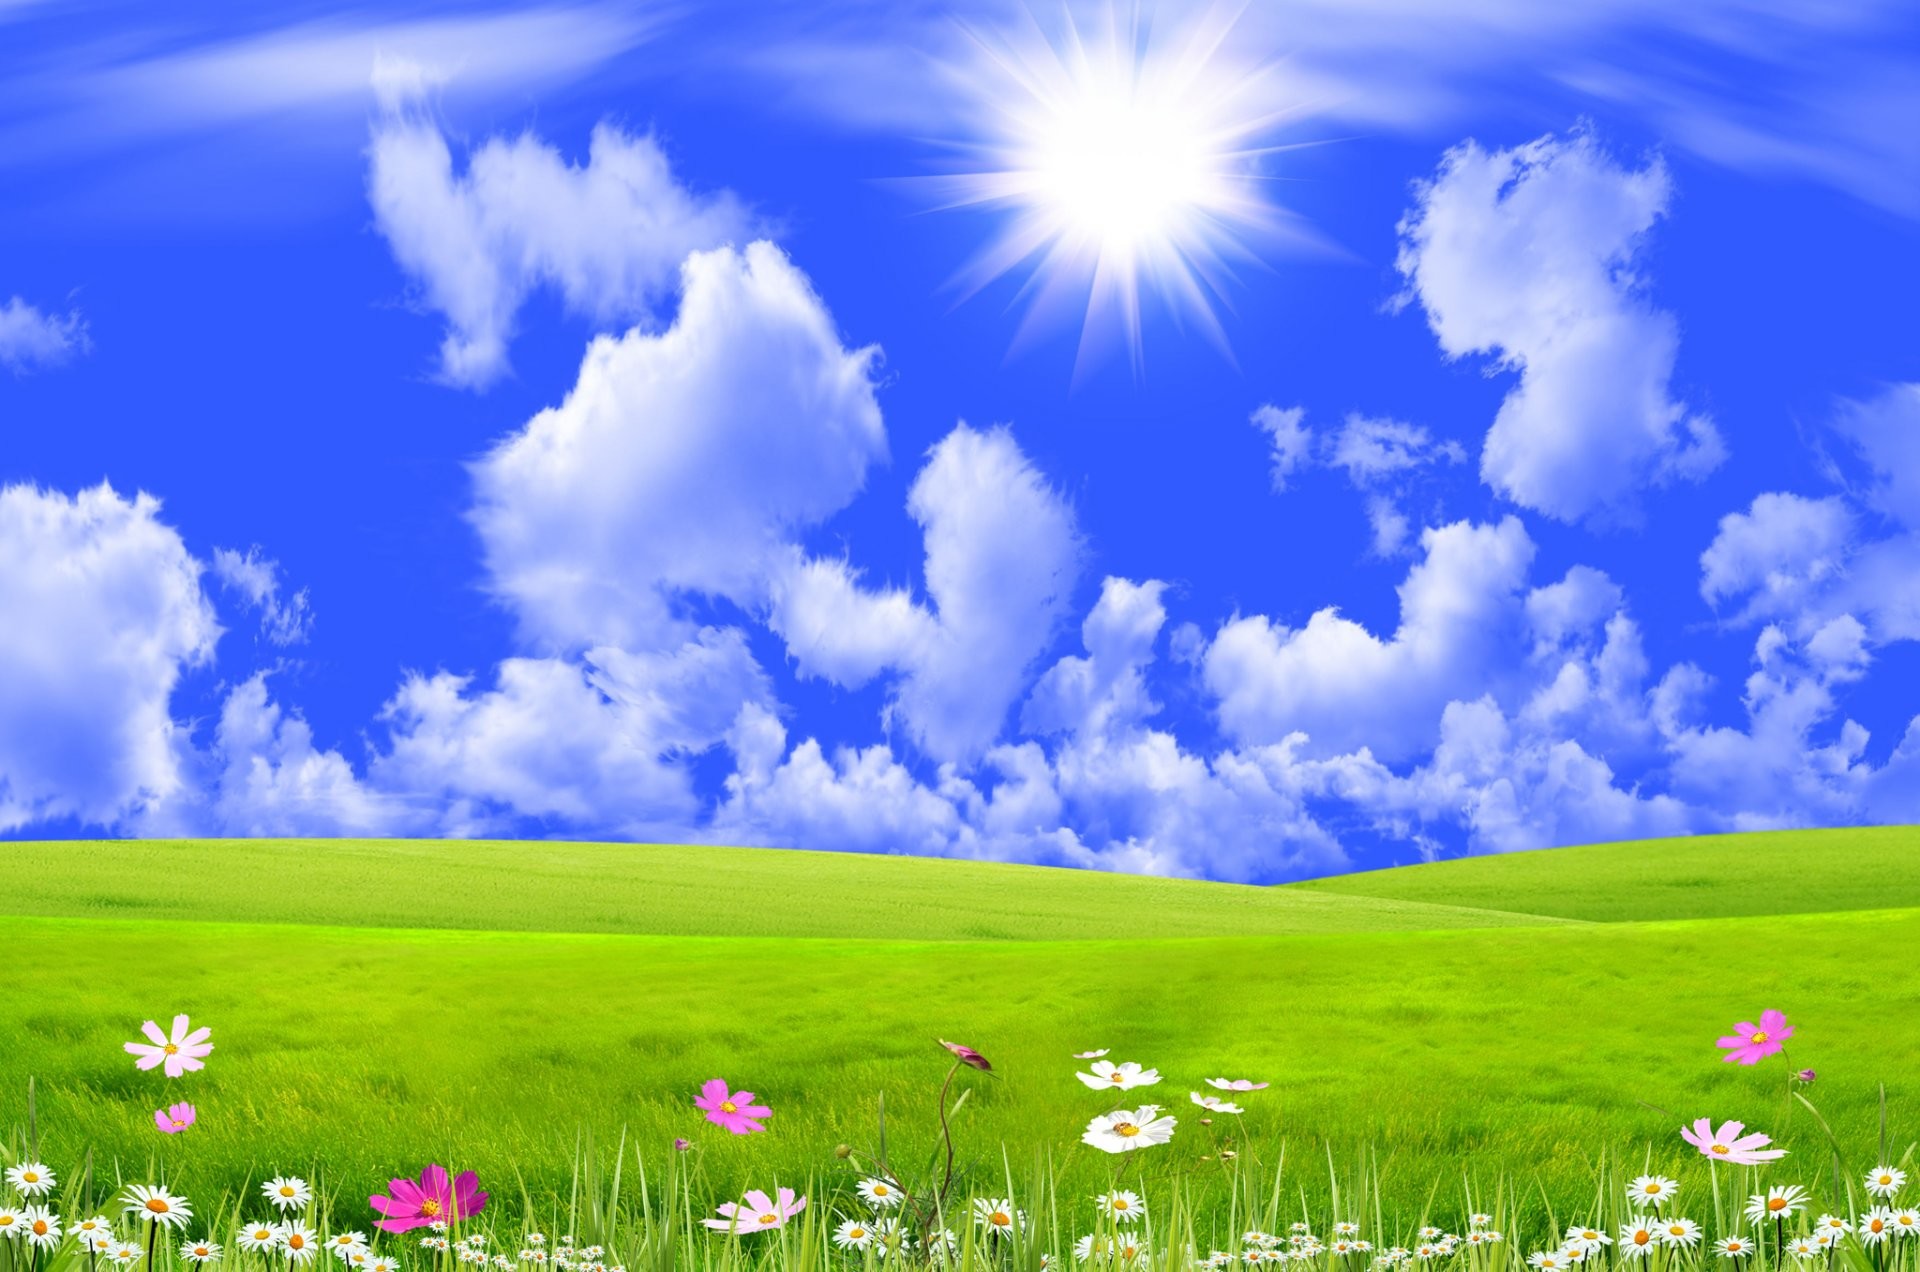 1920x1272 Grass And Sky Backgrounds. Grass And Sky Backgrounds G